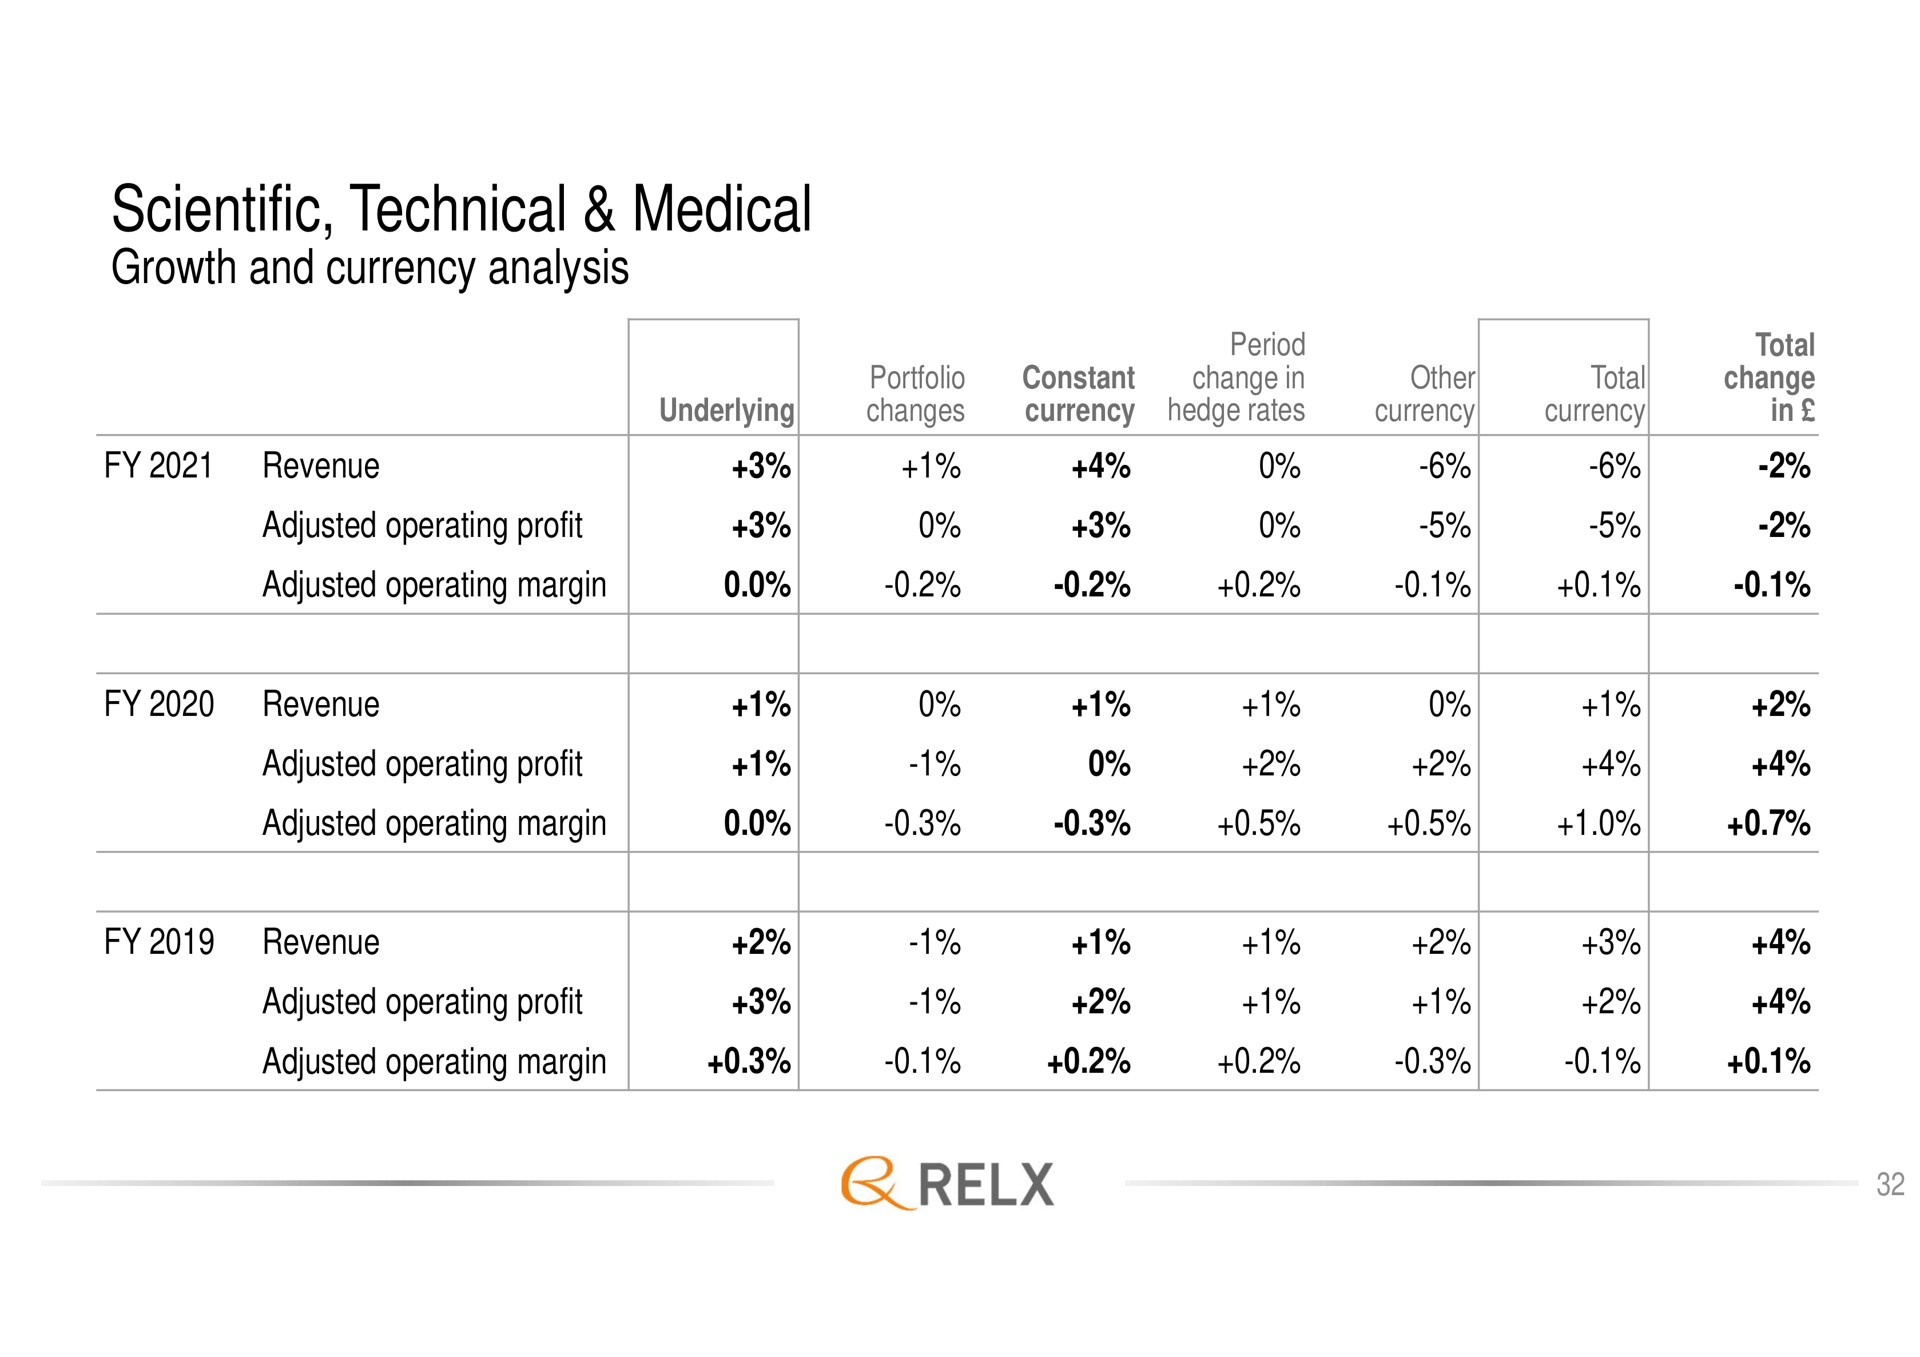 scientific technical medical growth and currency analysis | RELX